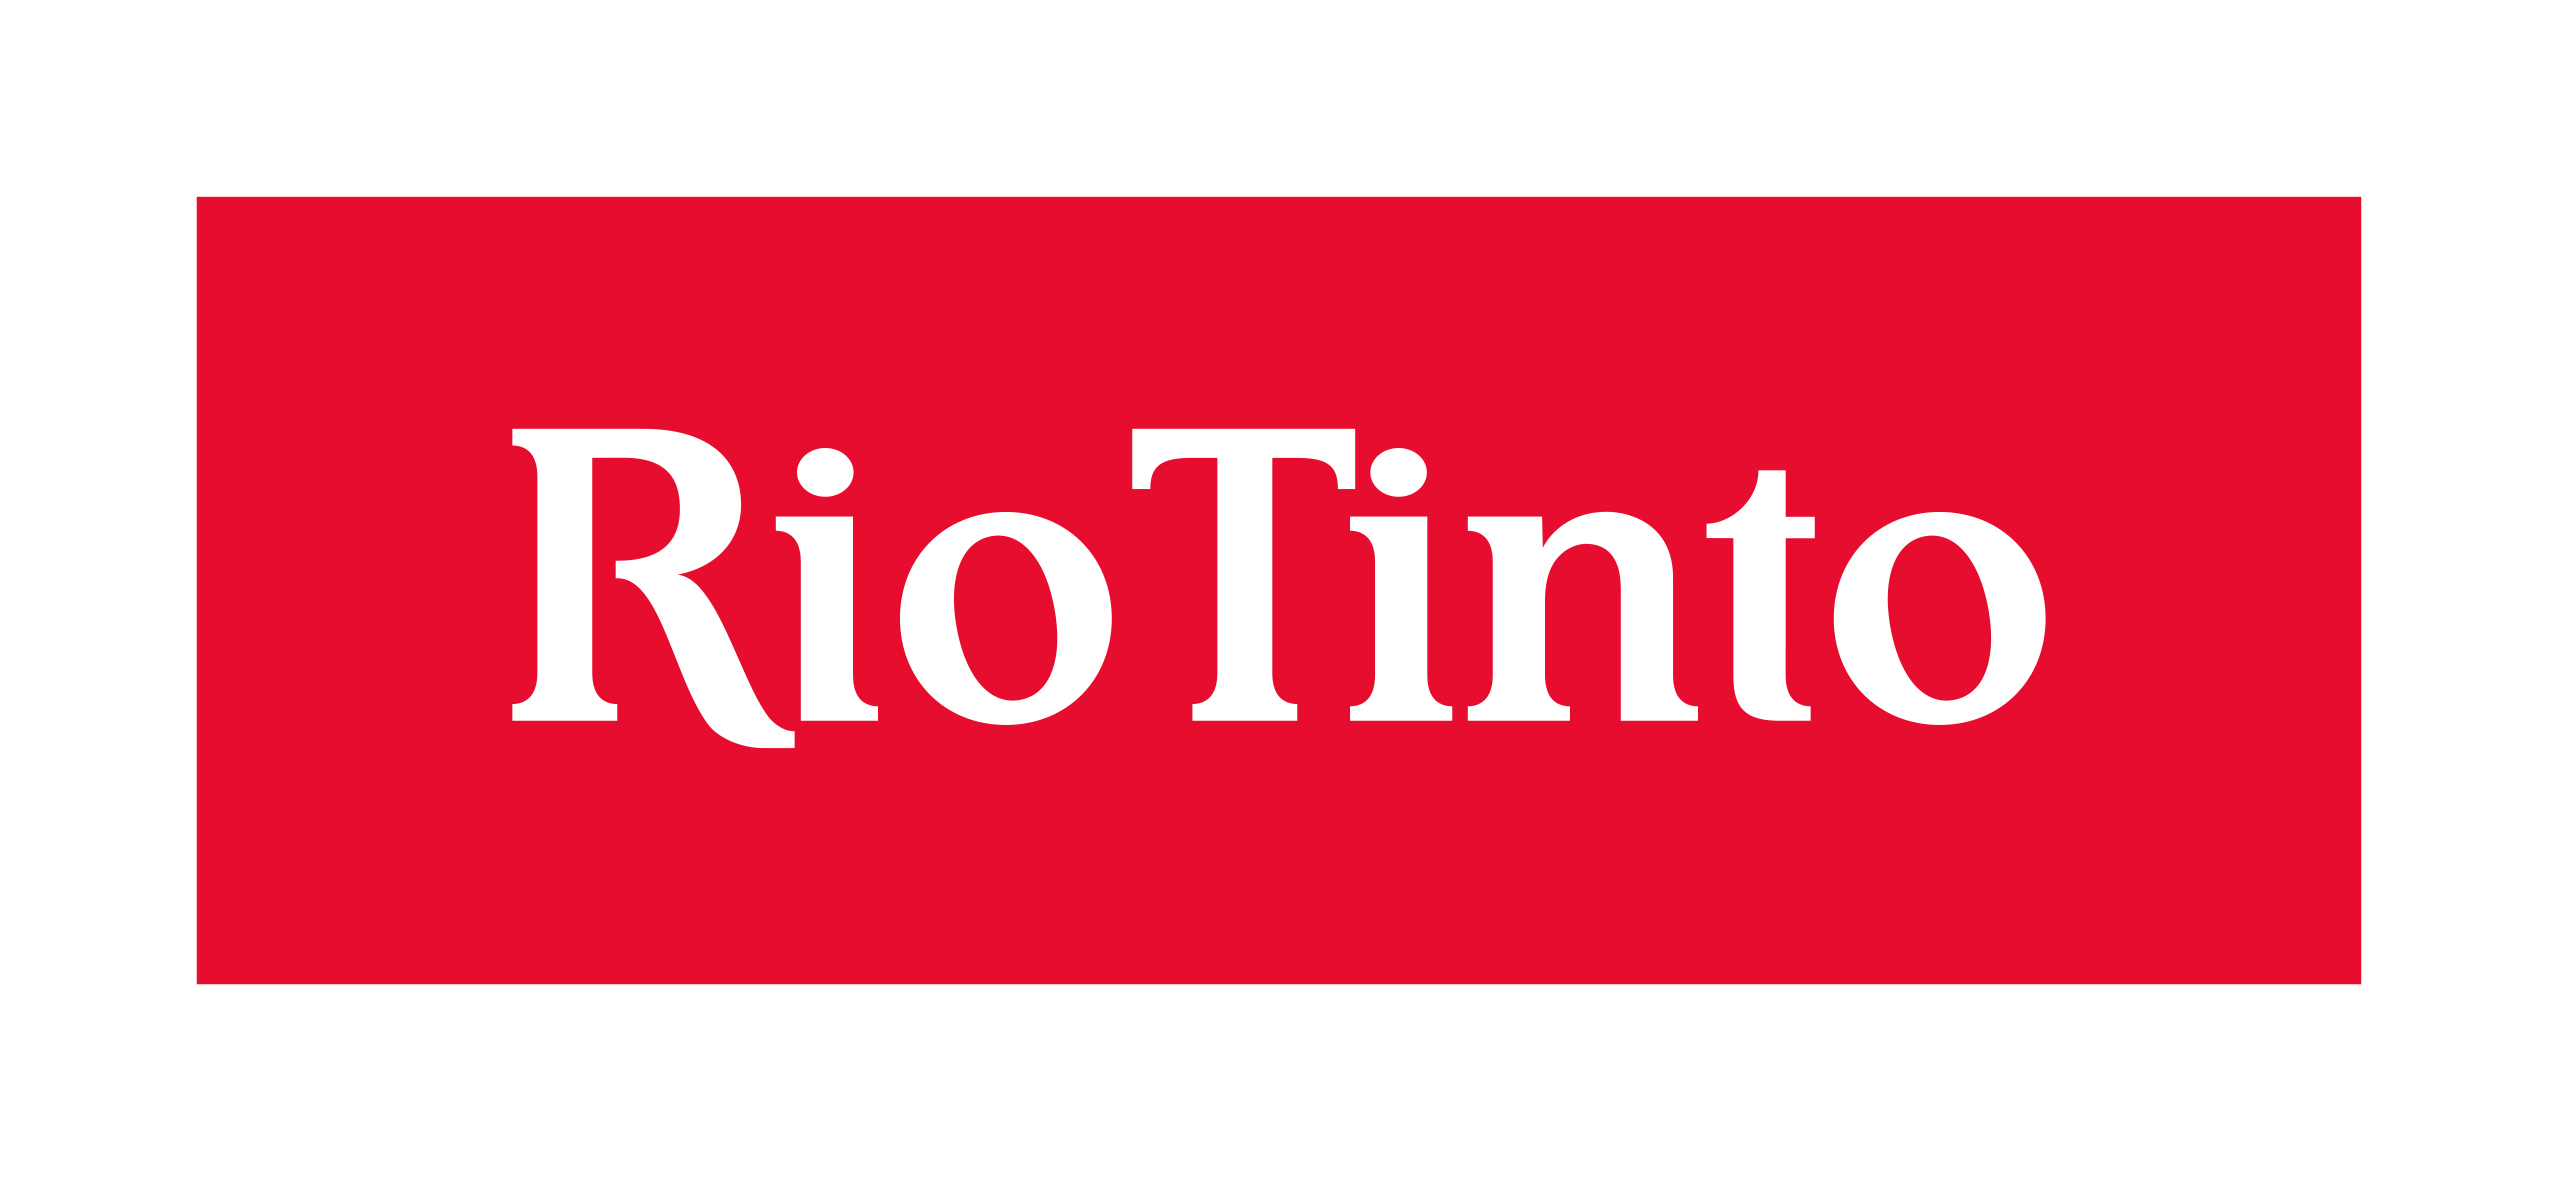 RioTinto_2017_Red